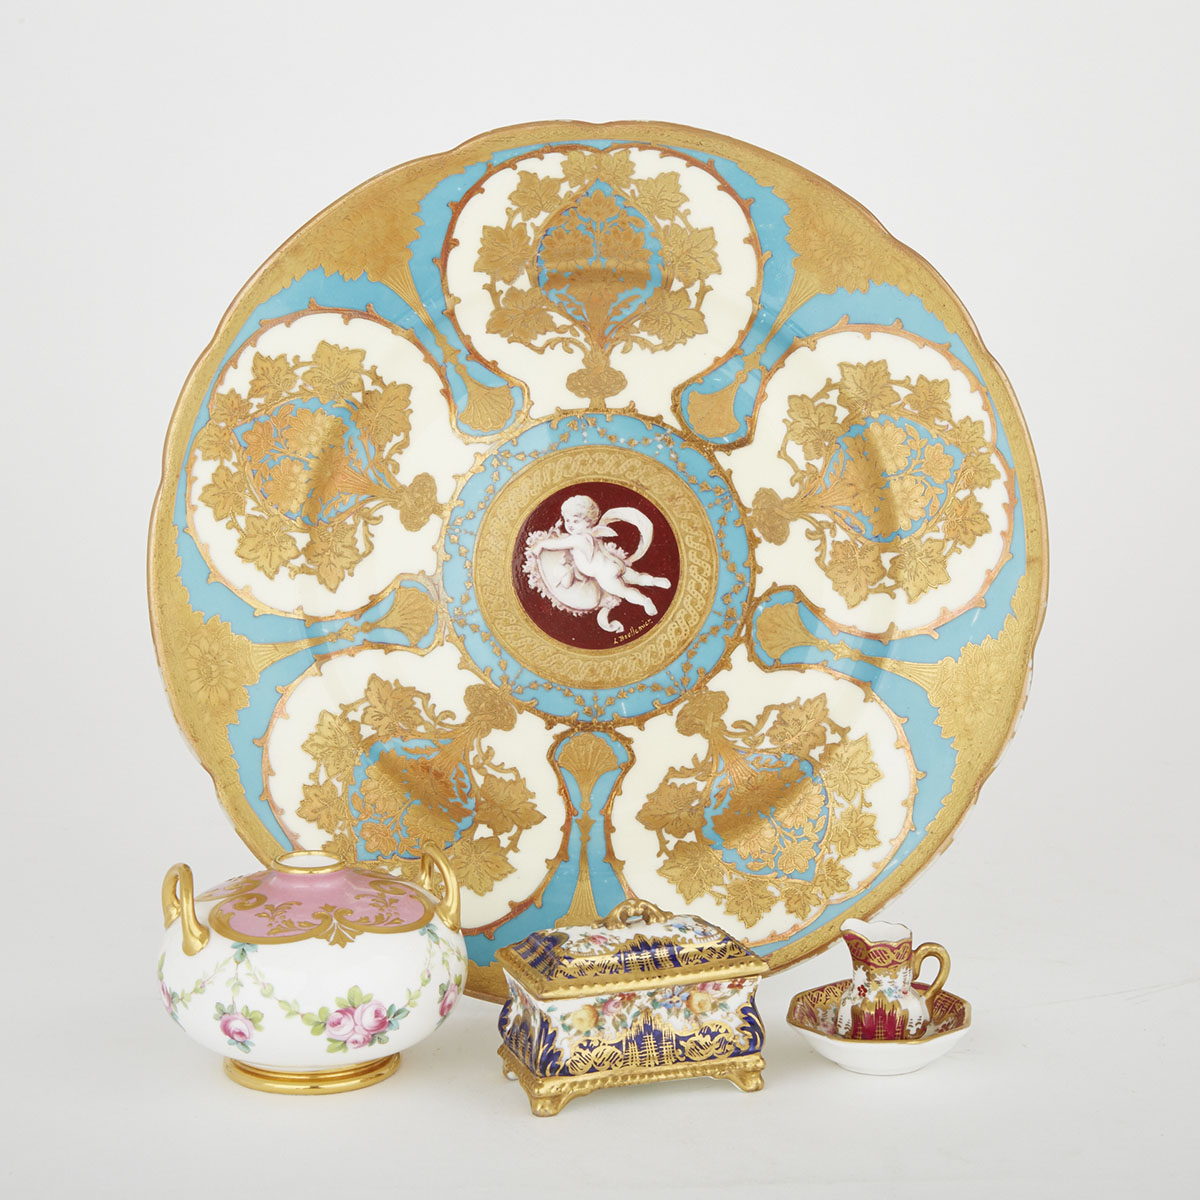 Thomas Morris Plate, Minton Small Vase, Crown Staffordshire Covered Box and Miniature Jug and Basin, 20th century